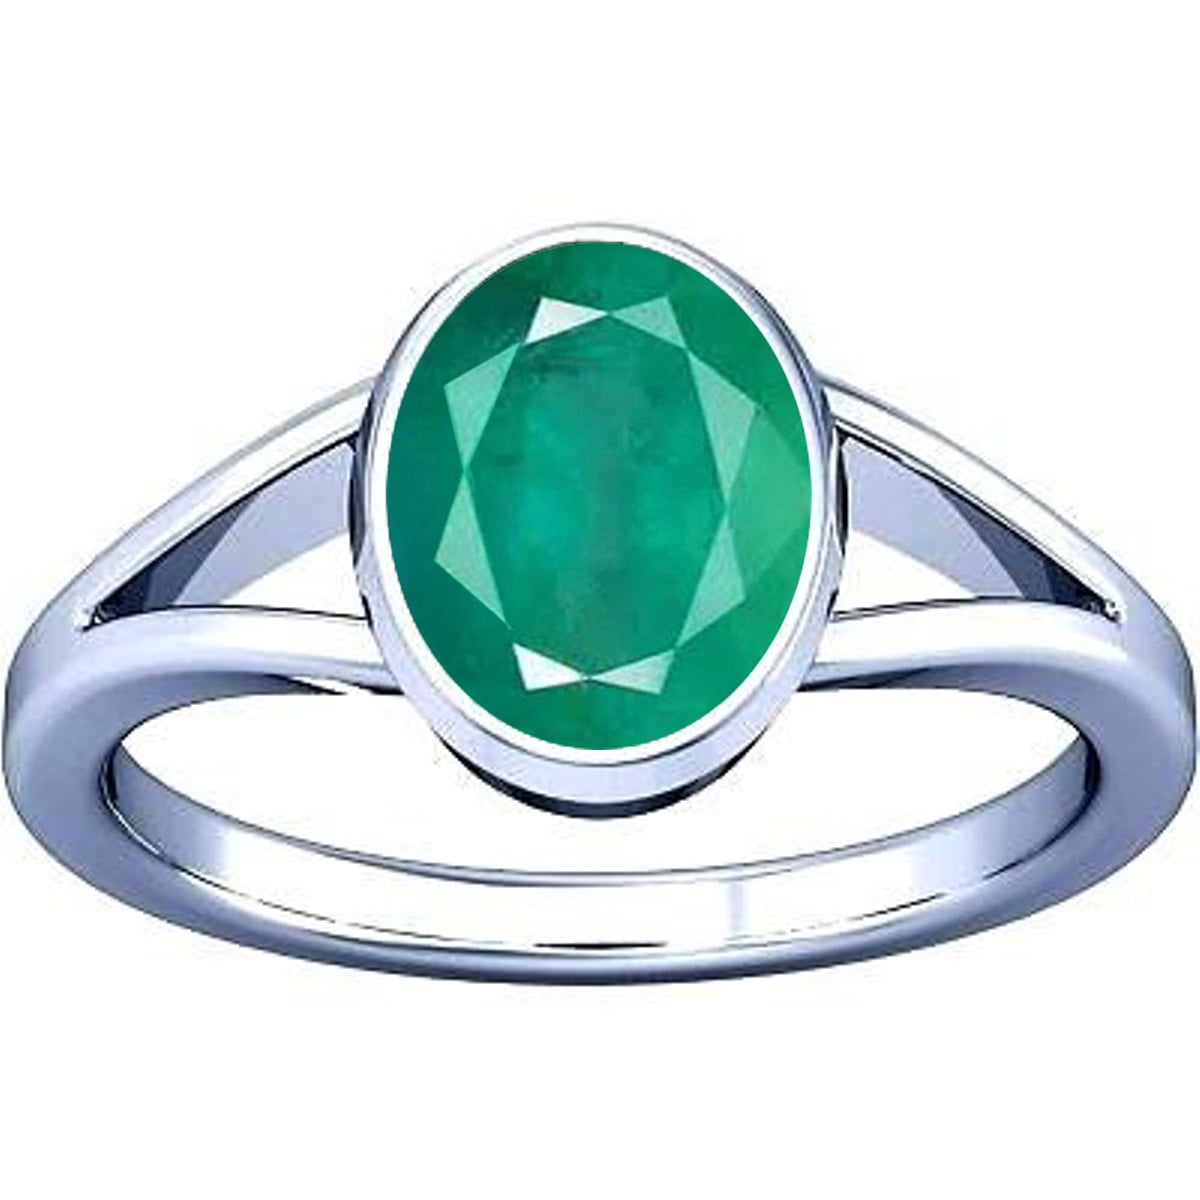 RISHAB GEMSTORE 13.00 Ratti Natural Emerald Ring (Natural Panna/Panna stone  Gold Ring) Original AAA Quality Gemstone Adjustable Ring Astrological  Purpose For Men Women By Lab Certified : Amazon.in: Fashion